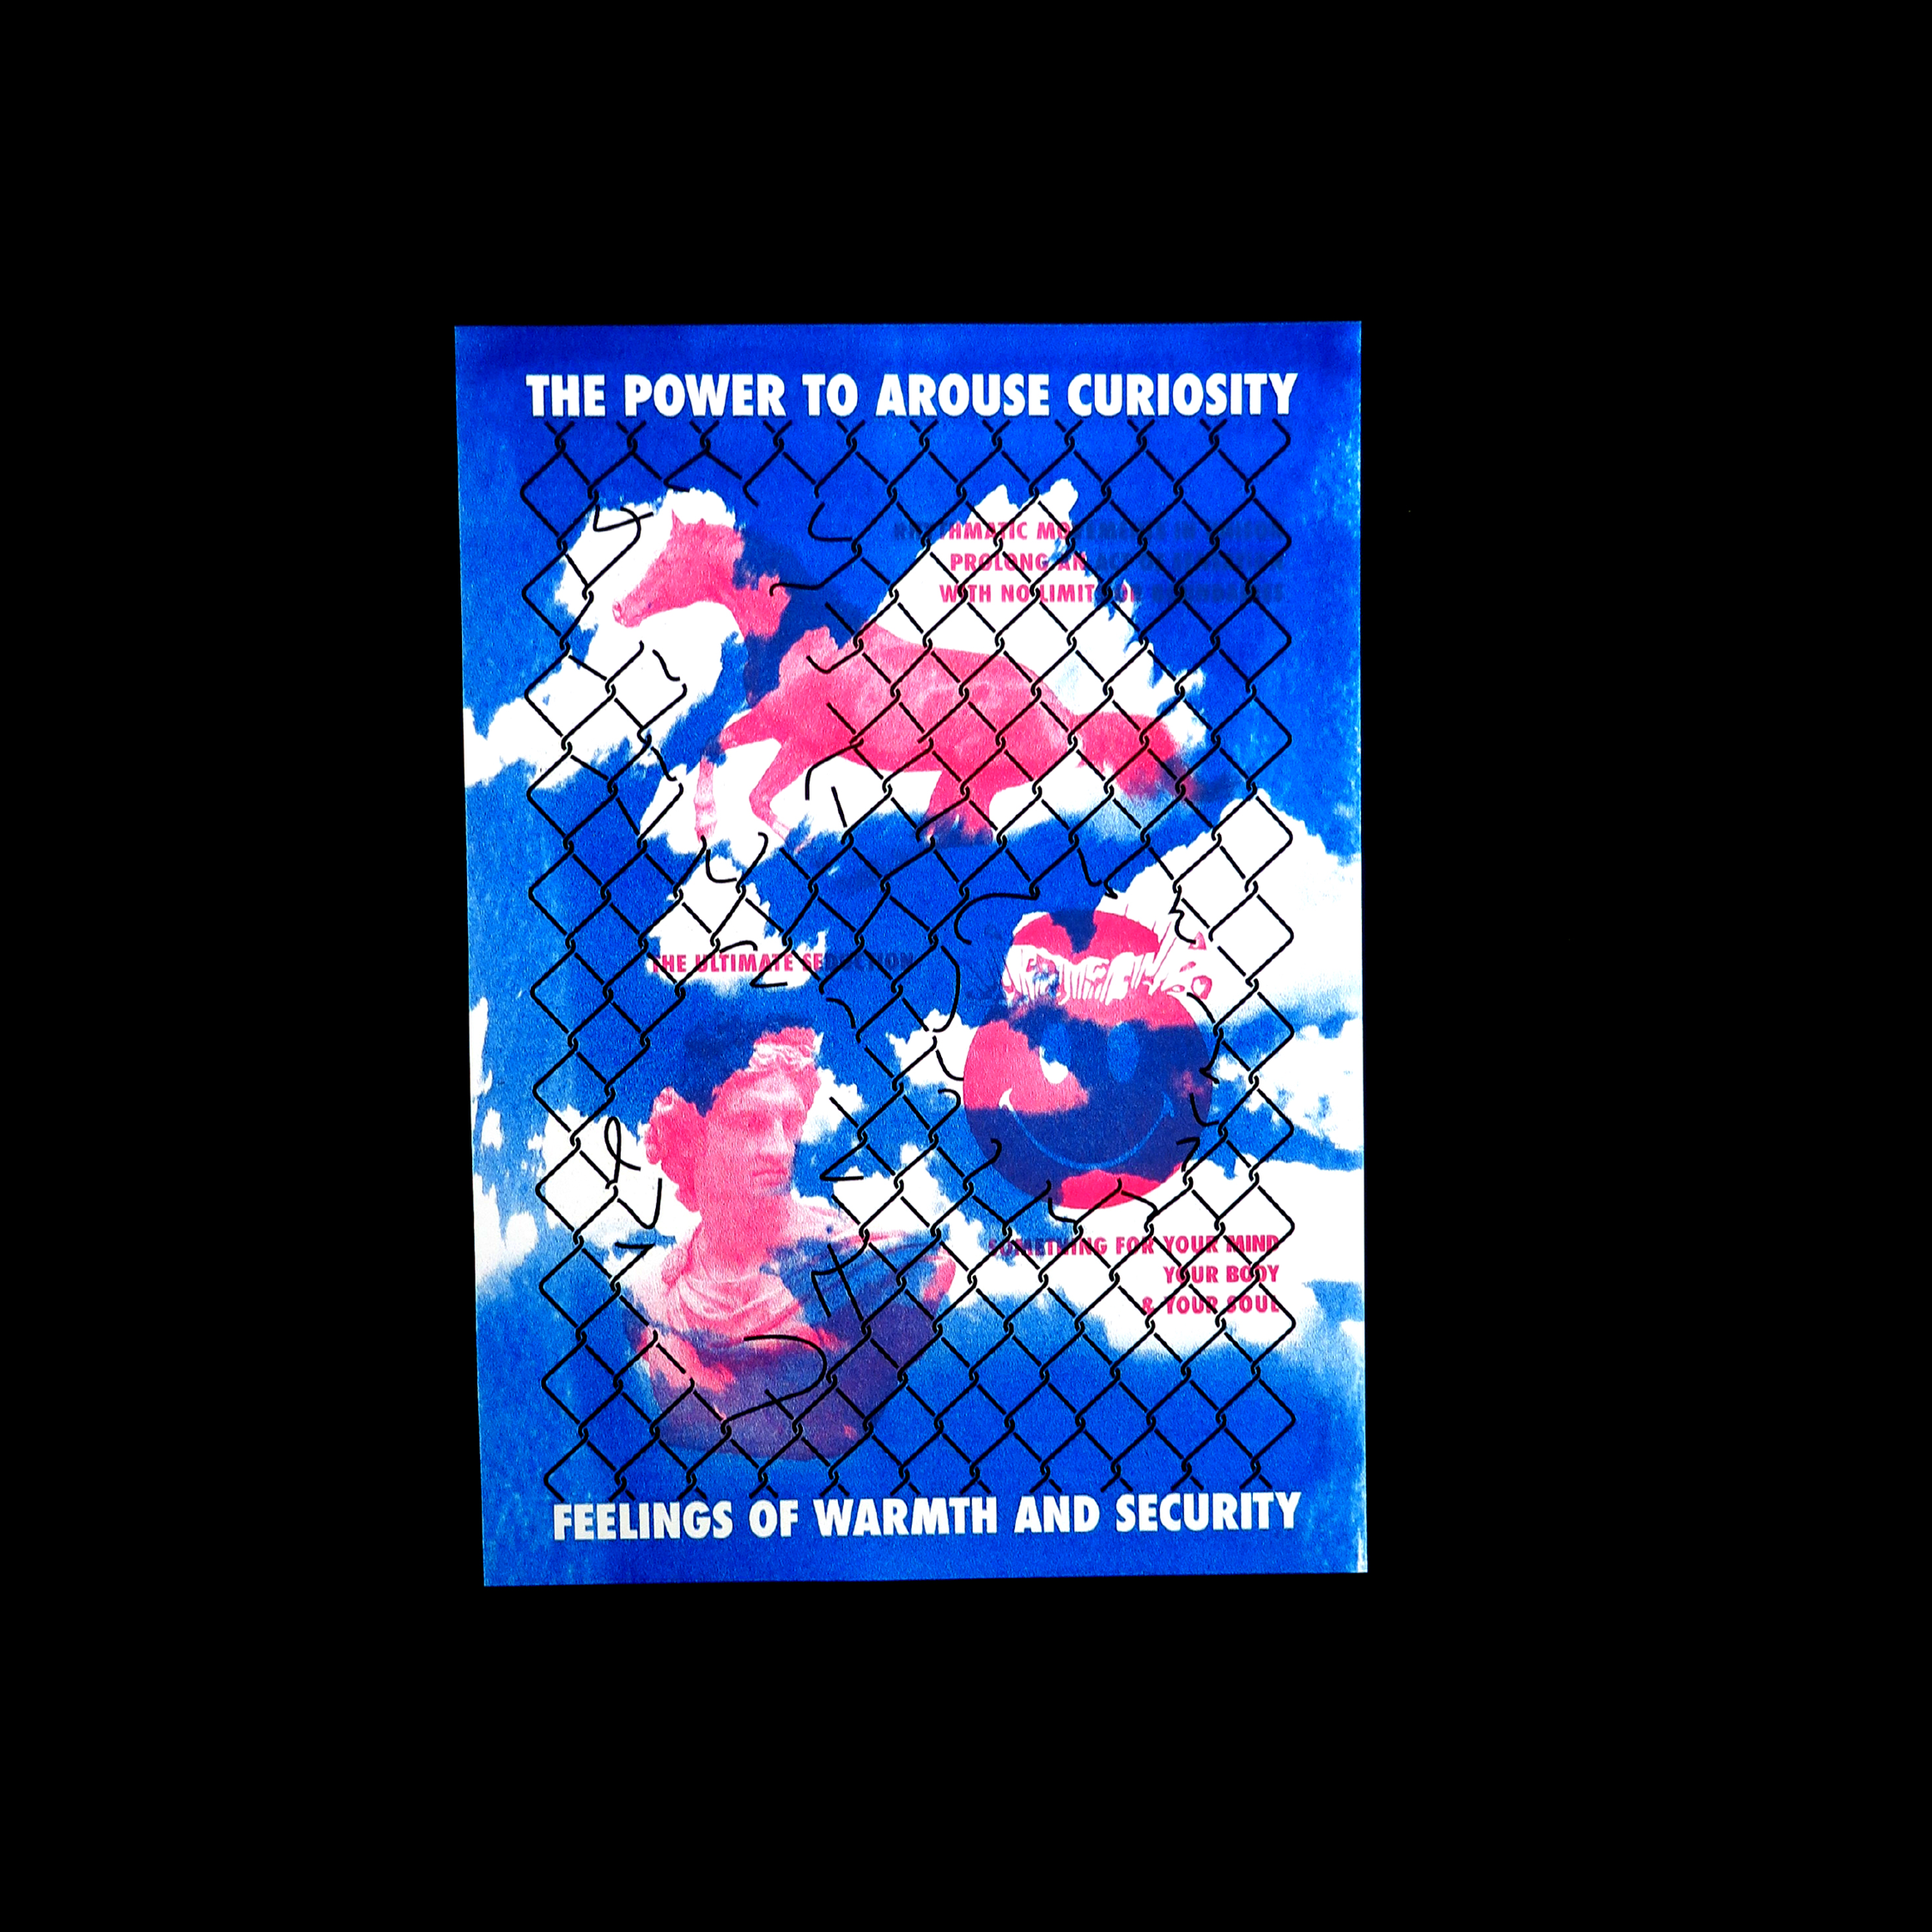 Disco at Studio 54 in New York. / Acid house at The Haçienda in Manchester. / Techno at Berghain in Berlin. ‘The Power To Arouse Curiosity’ is my new risograph print celebrating clubbing culture, freedom of expression and creativity.